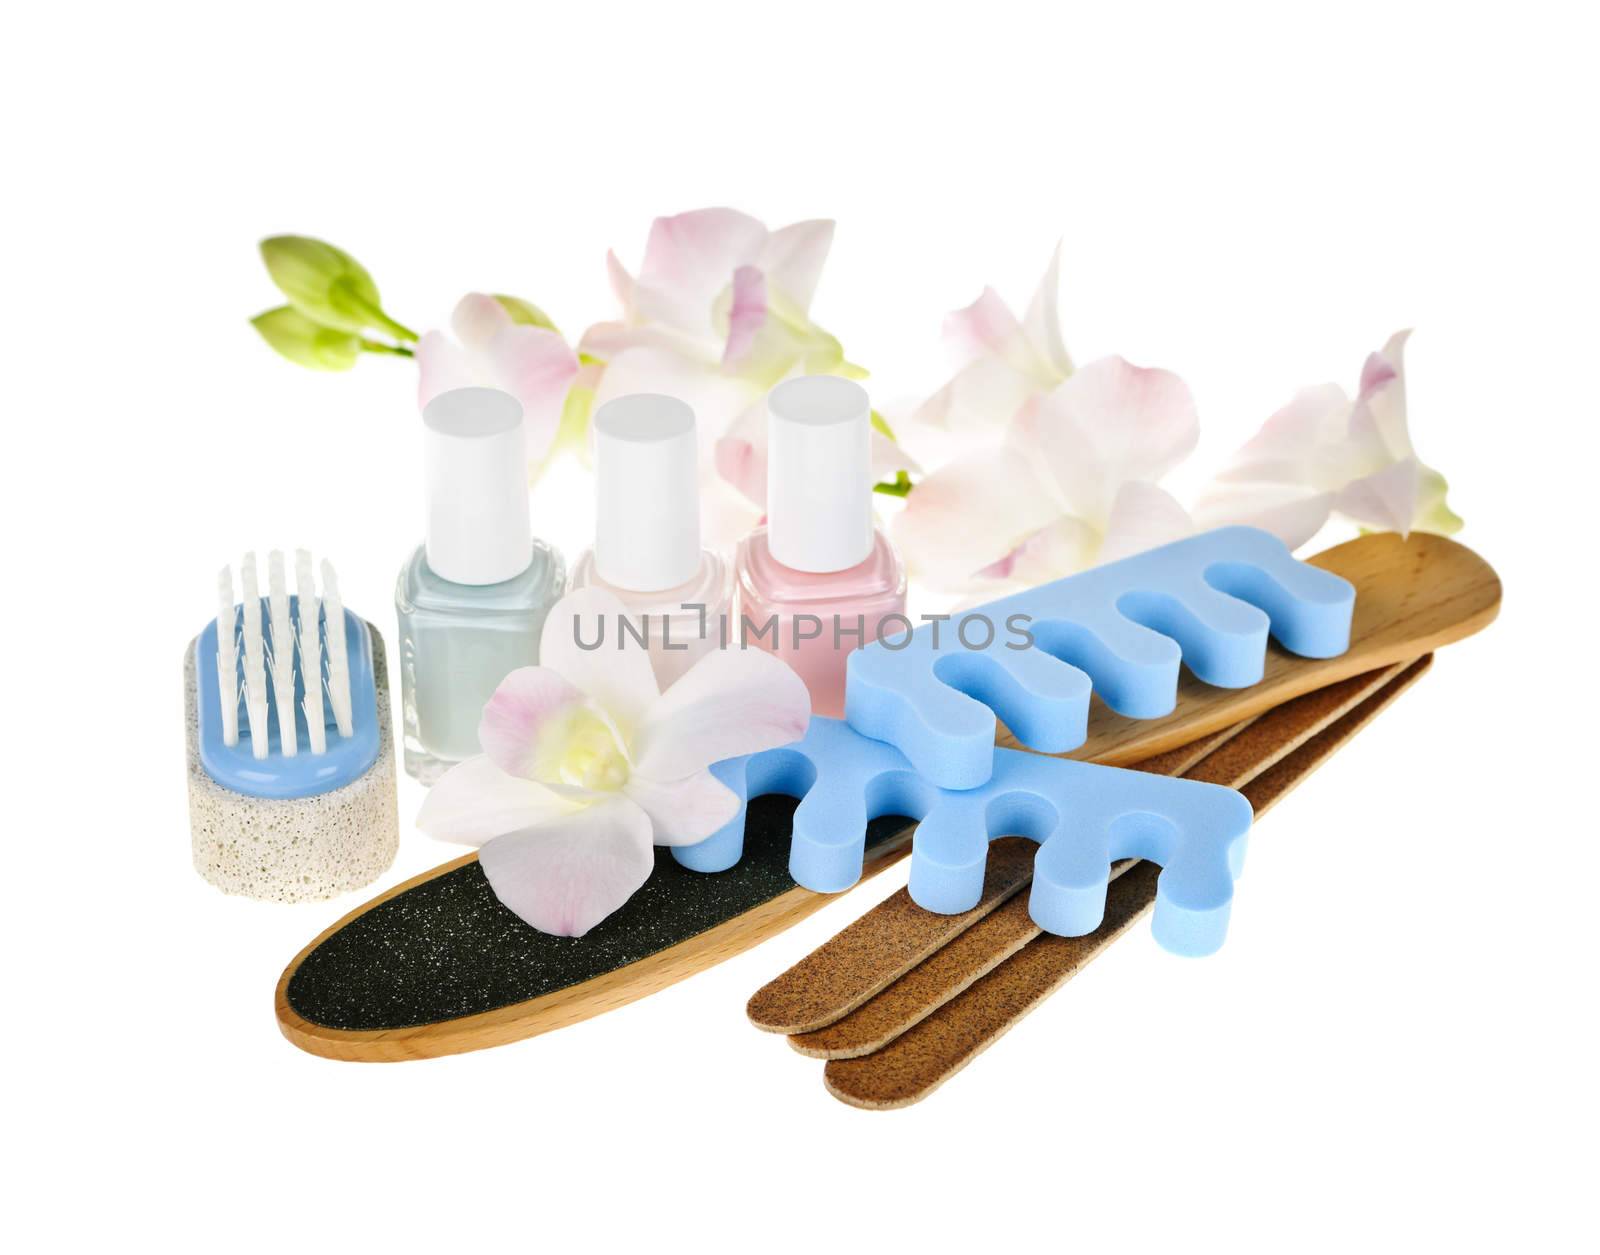 Pedicure accessories and nail polish on white background